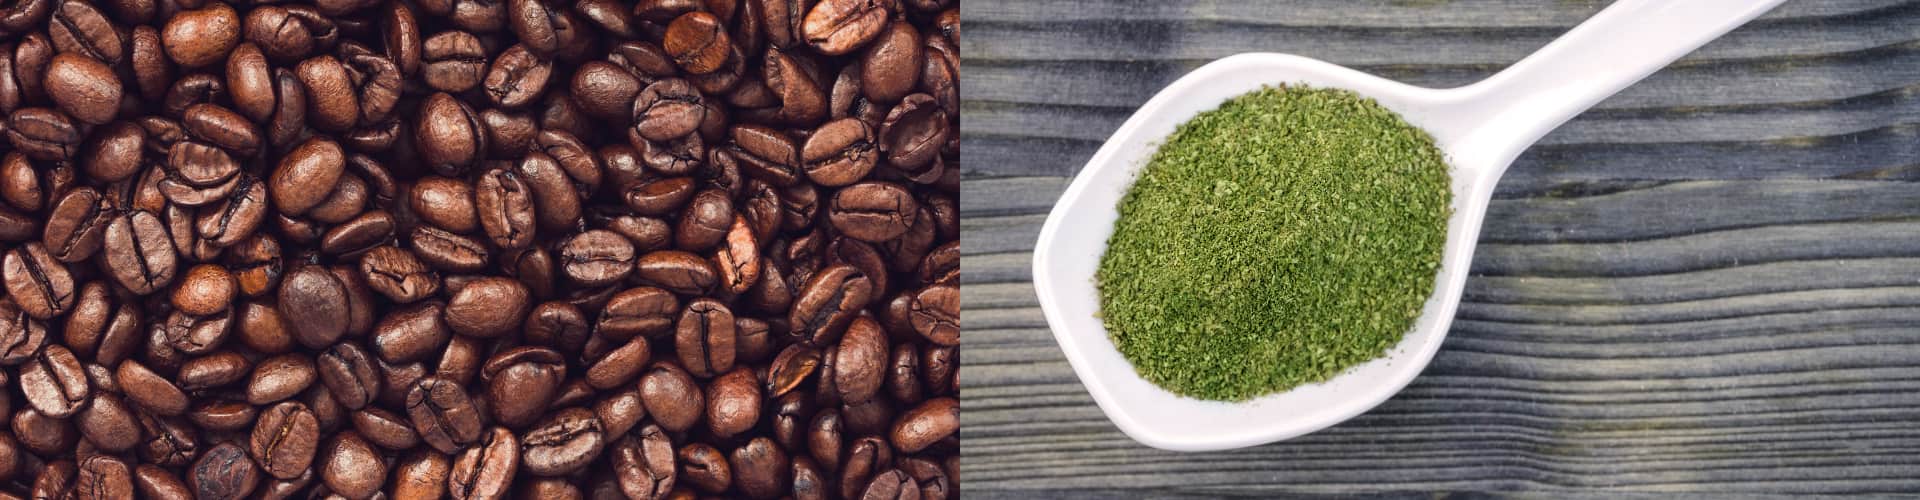 Looking to Give Up Coffee? Give Kratom a Try